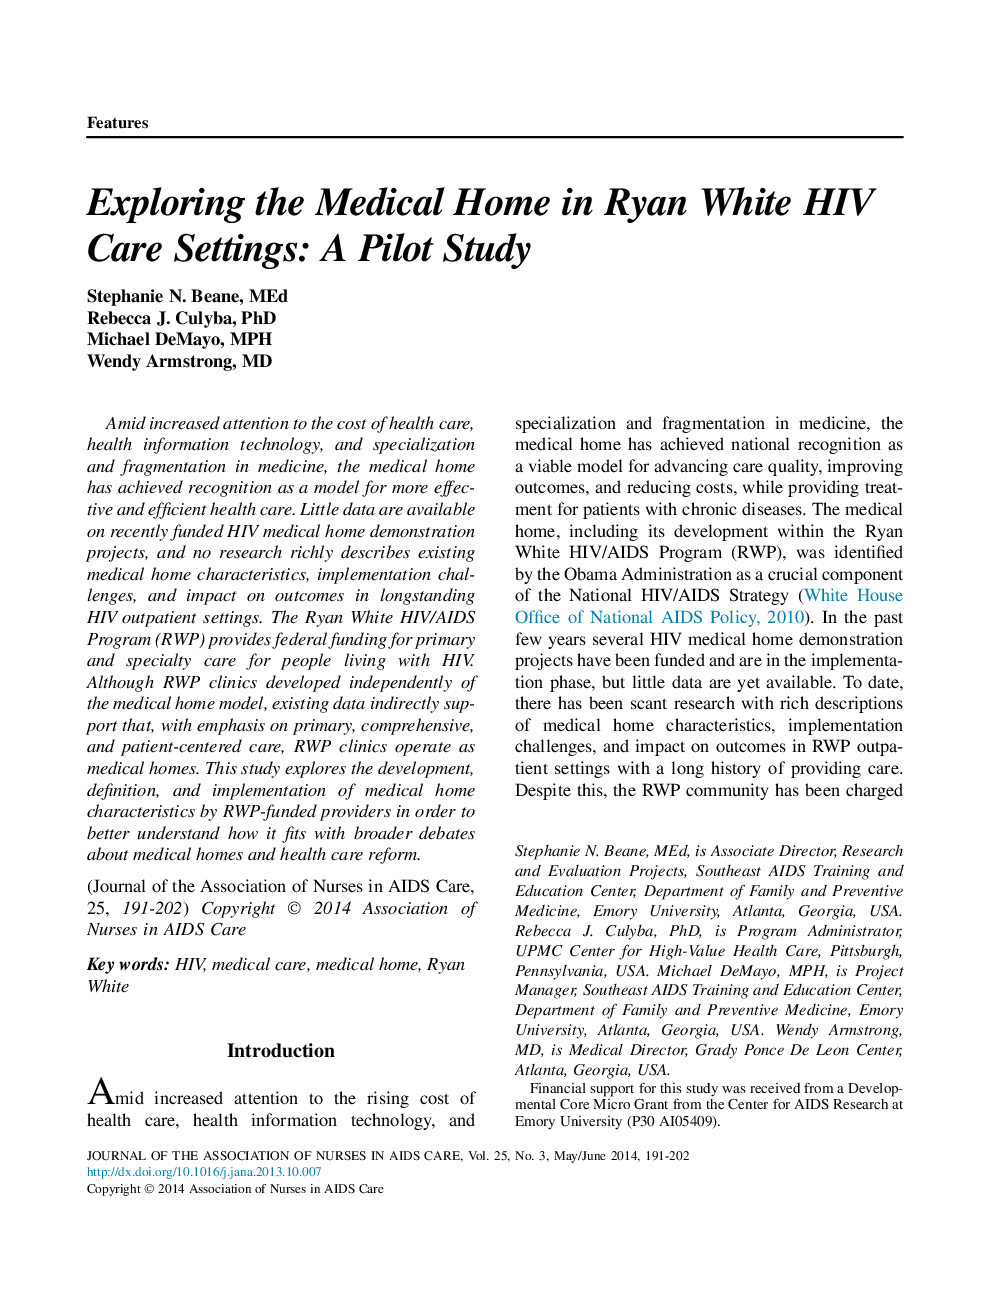 Exploring the Medical Home in Ryan White HIV Care Settings: A Pilot Study 